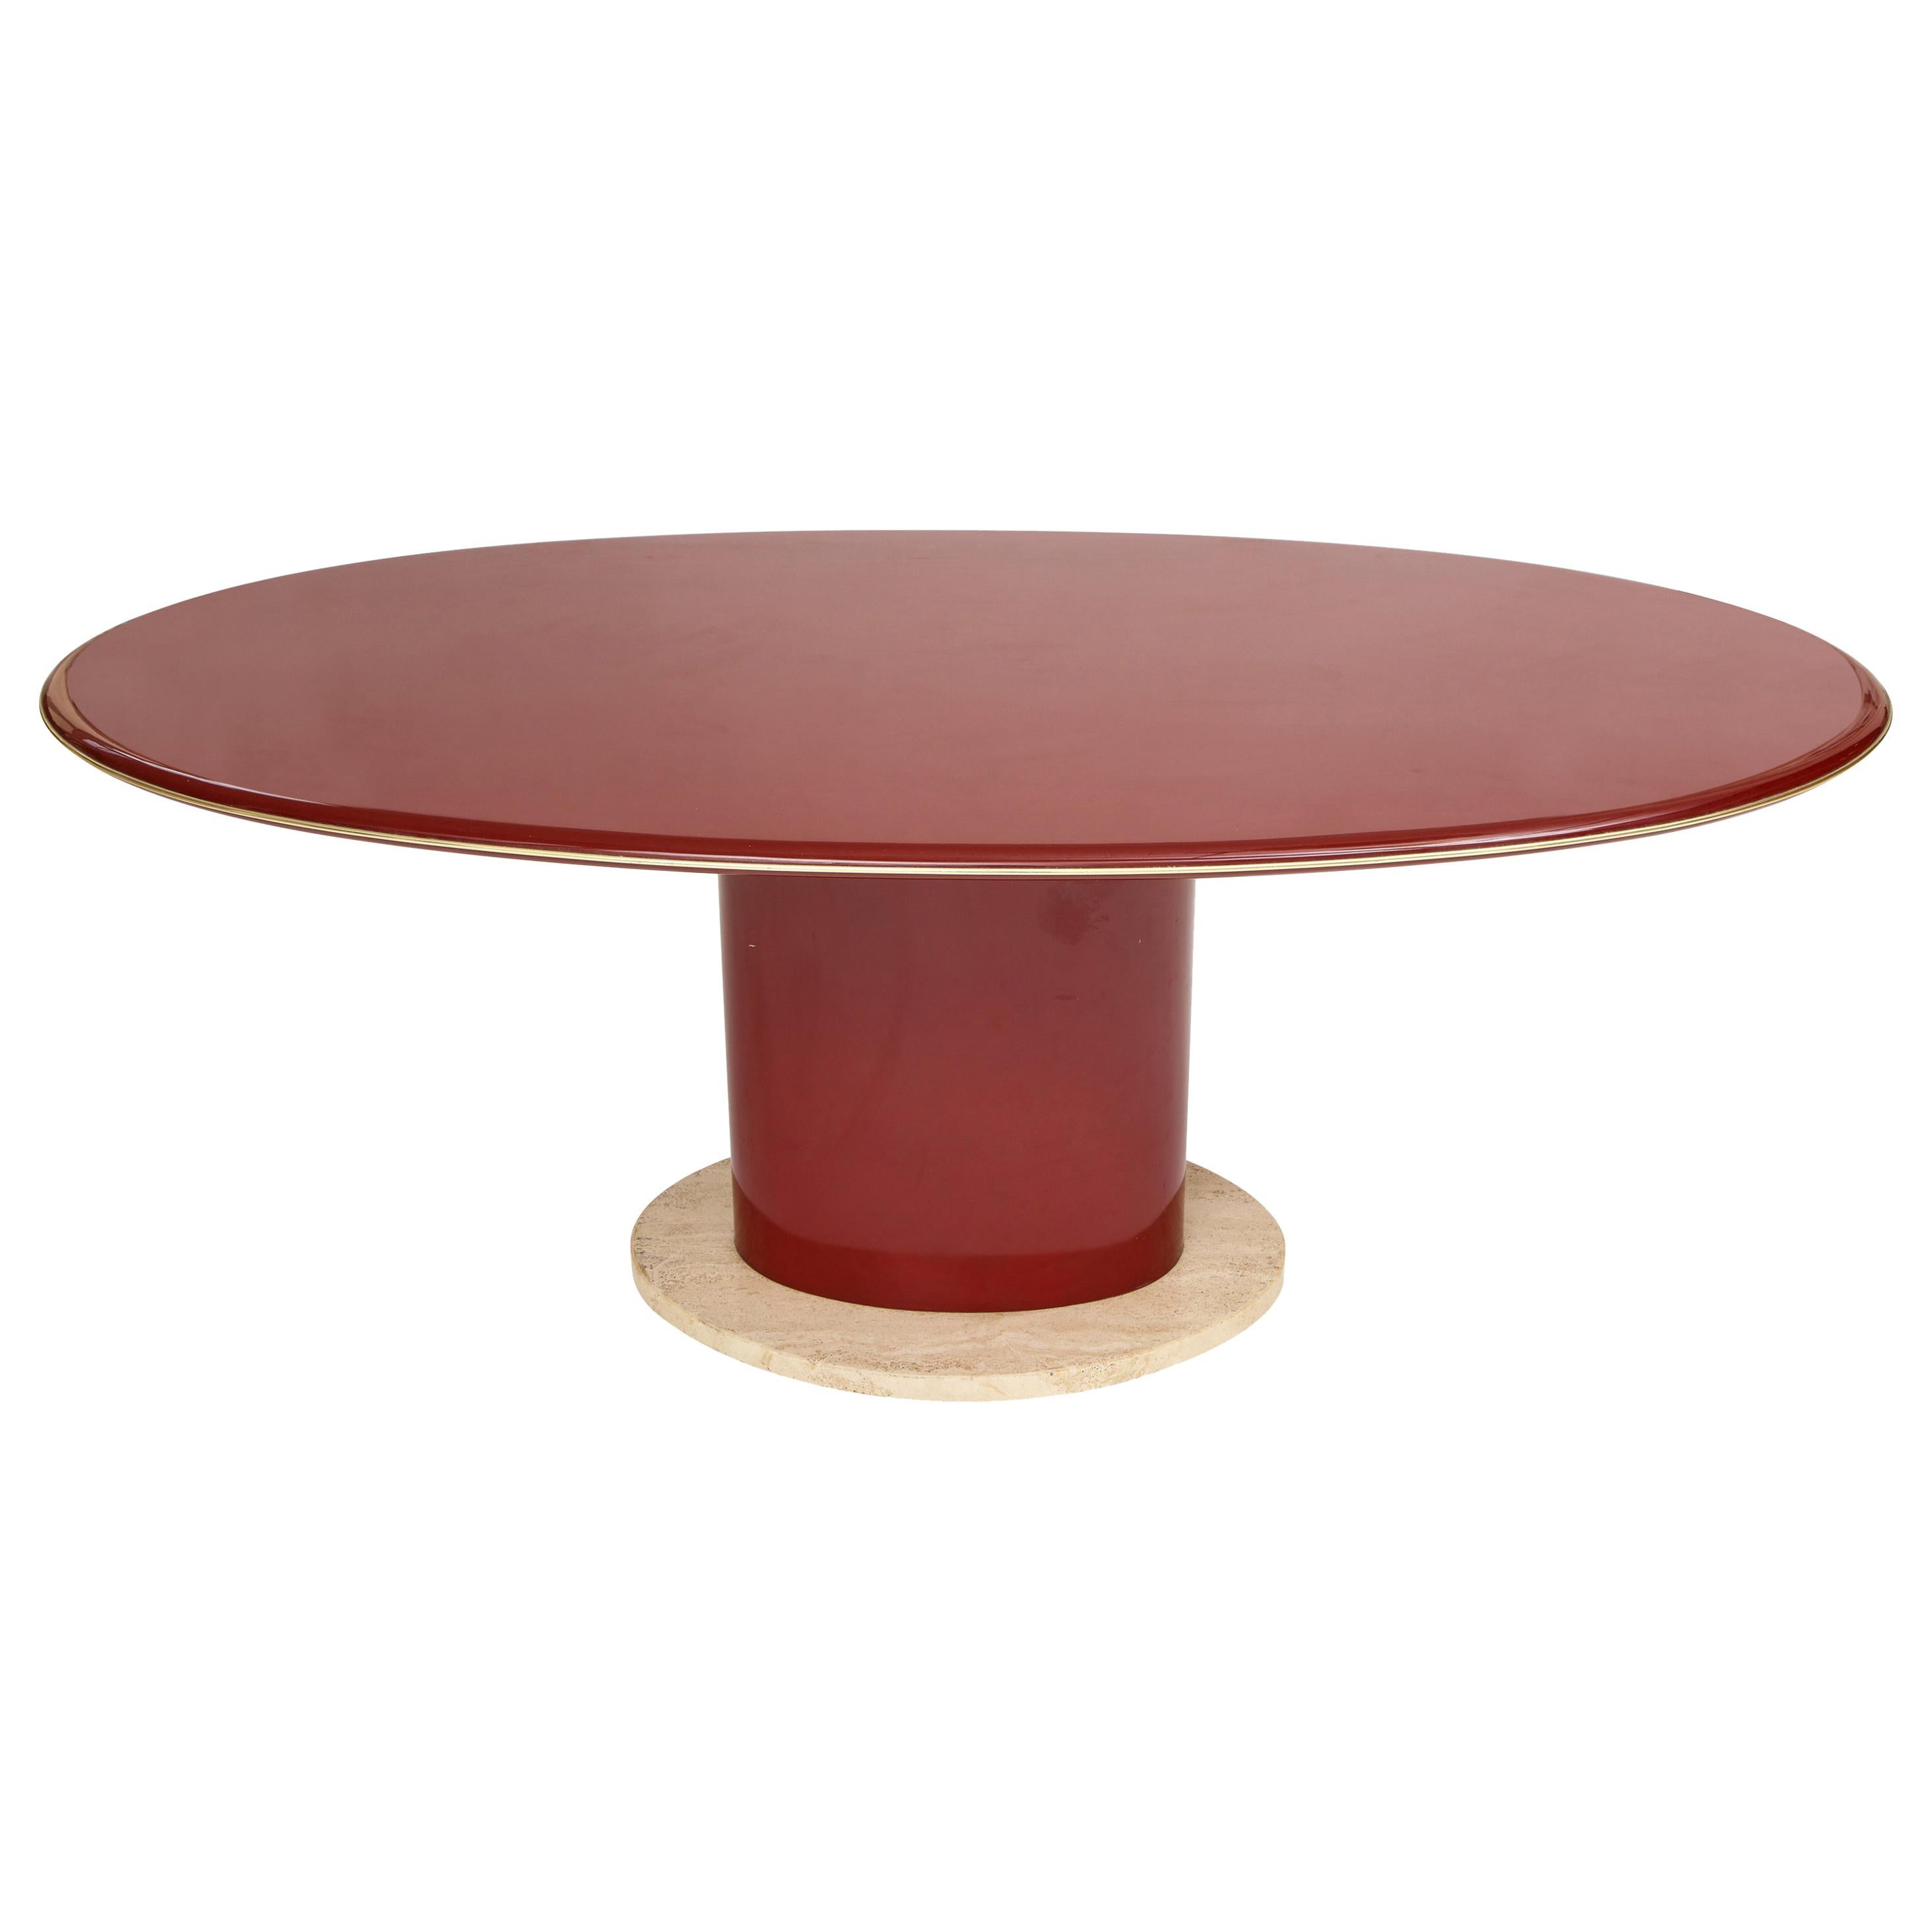 Red Wood Lacquer Dining Table, Desk, Travertine Base and Gold Trim, 1980s France